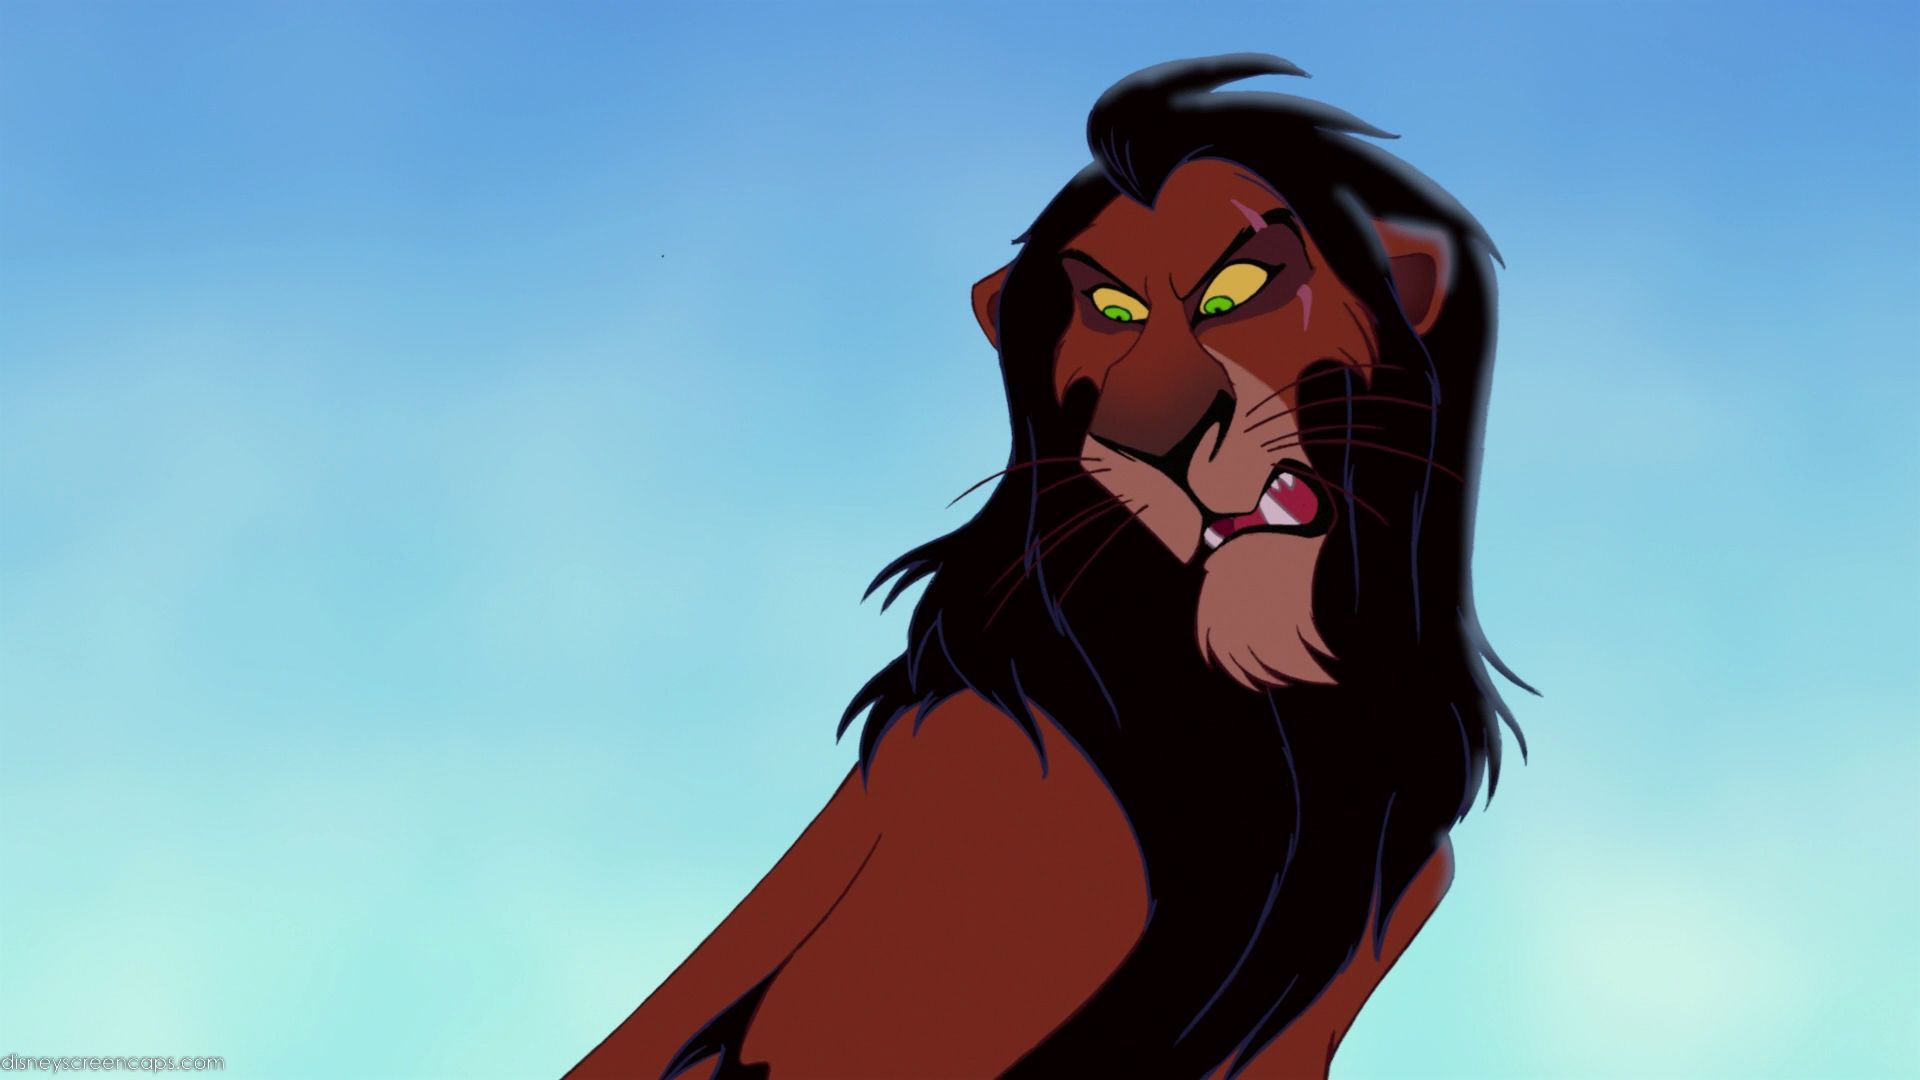 Scar from Disney's The Lion King